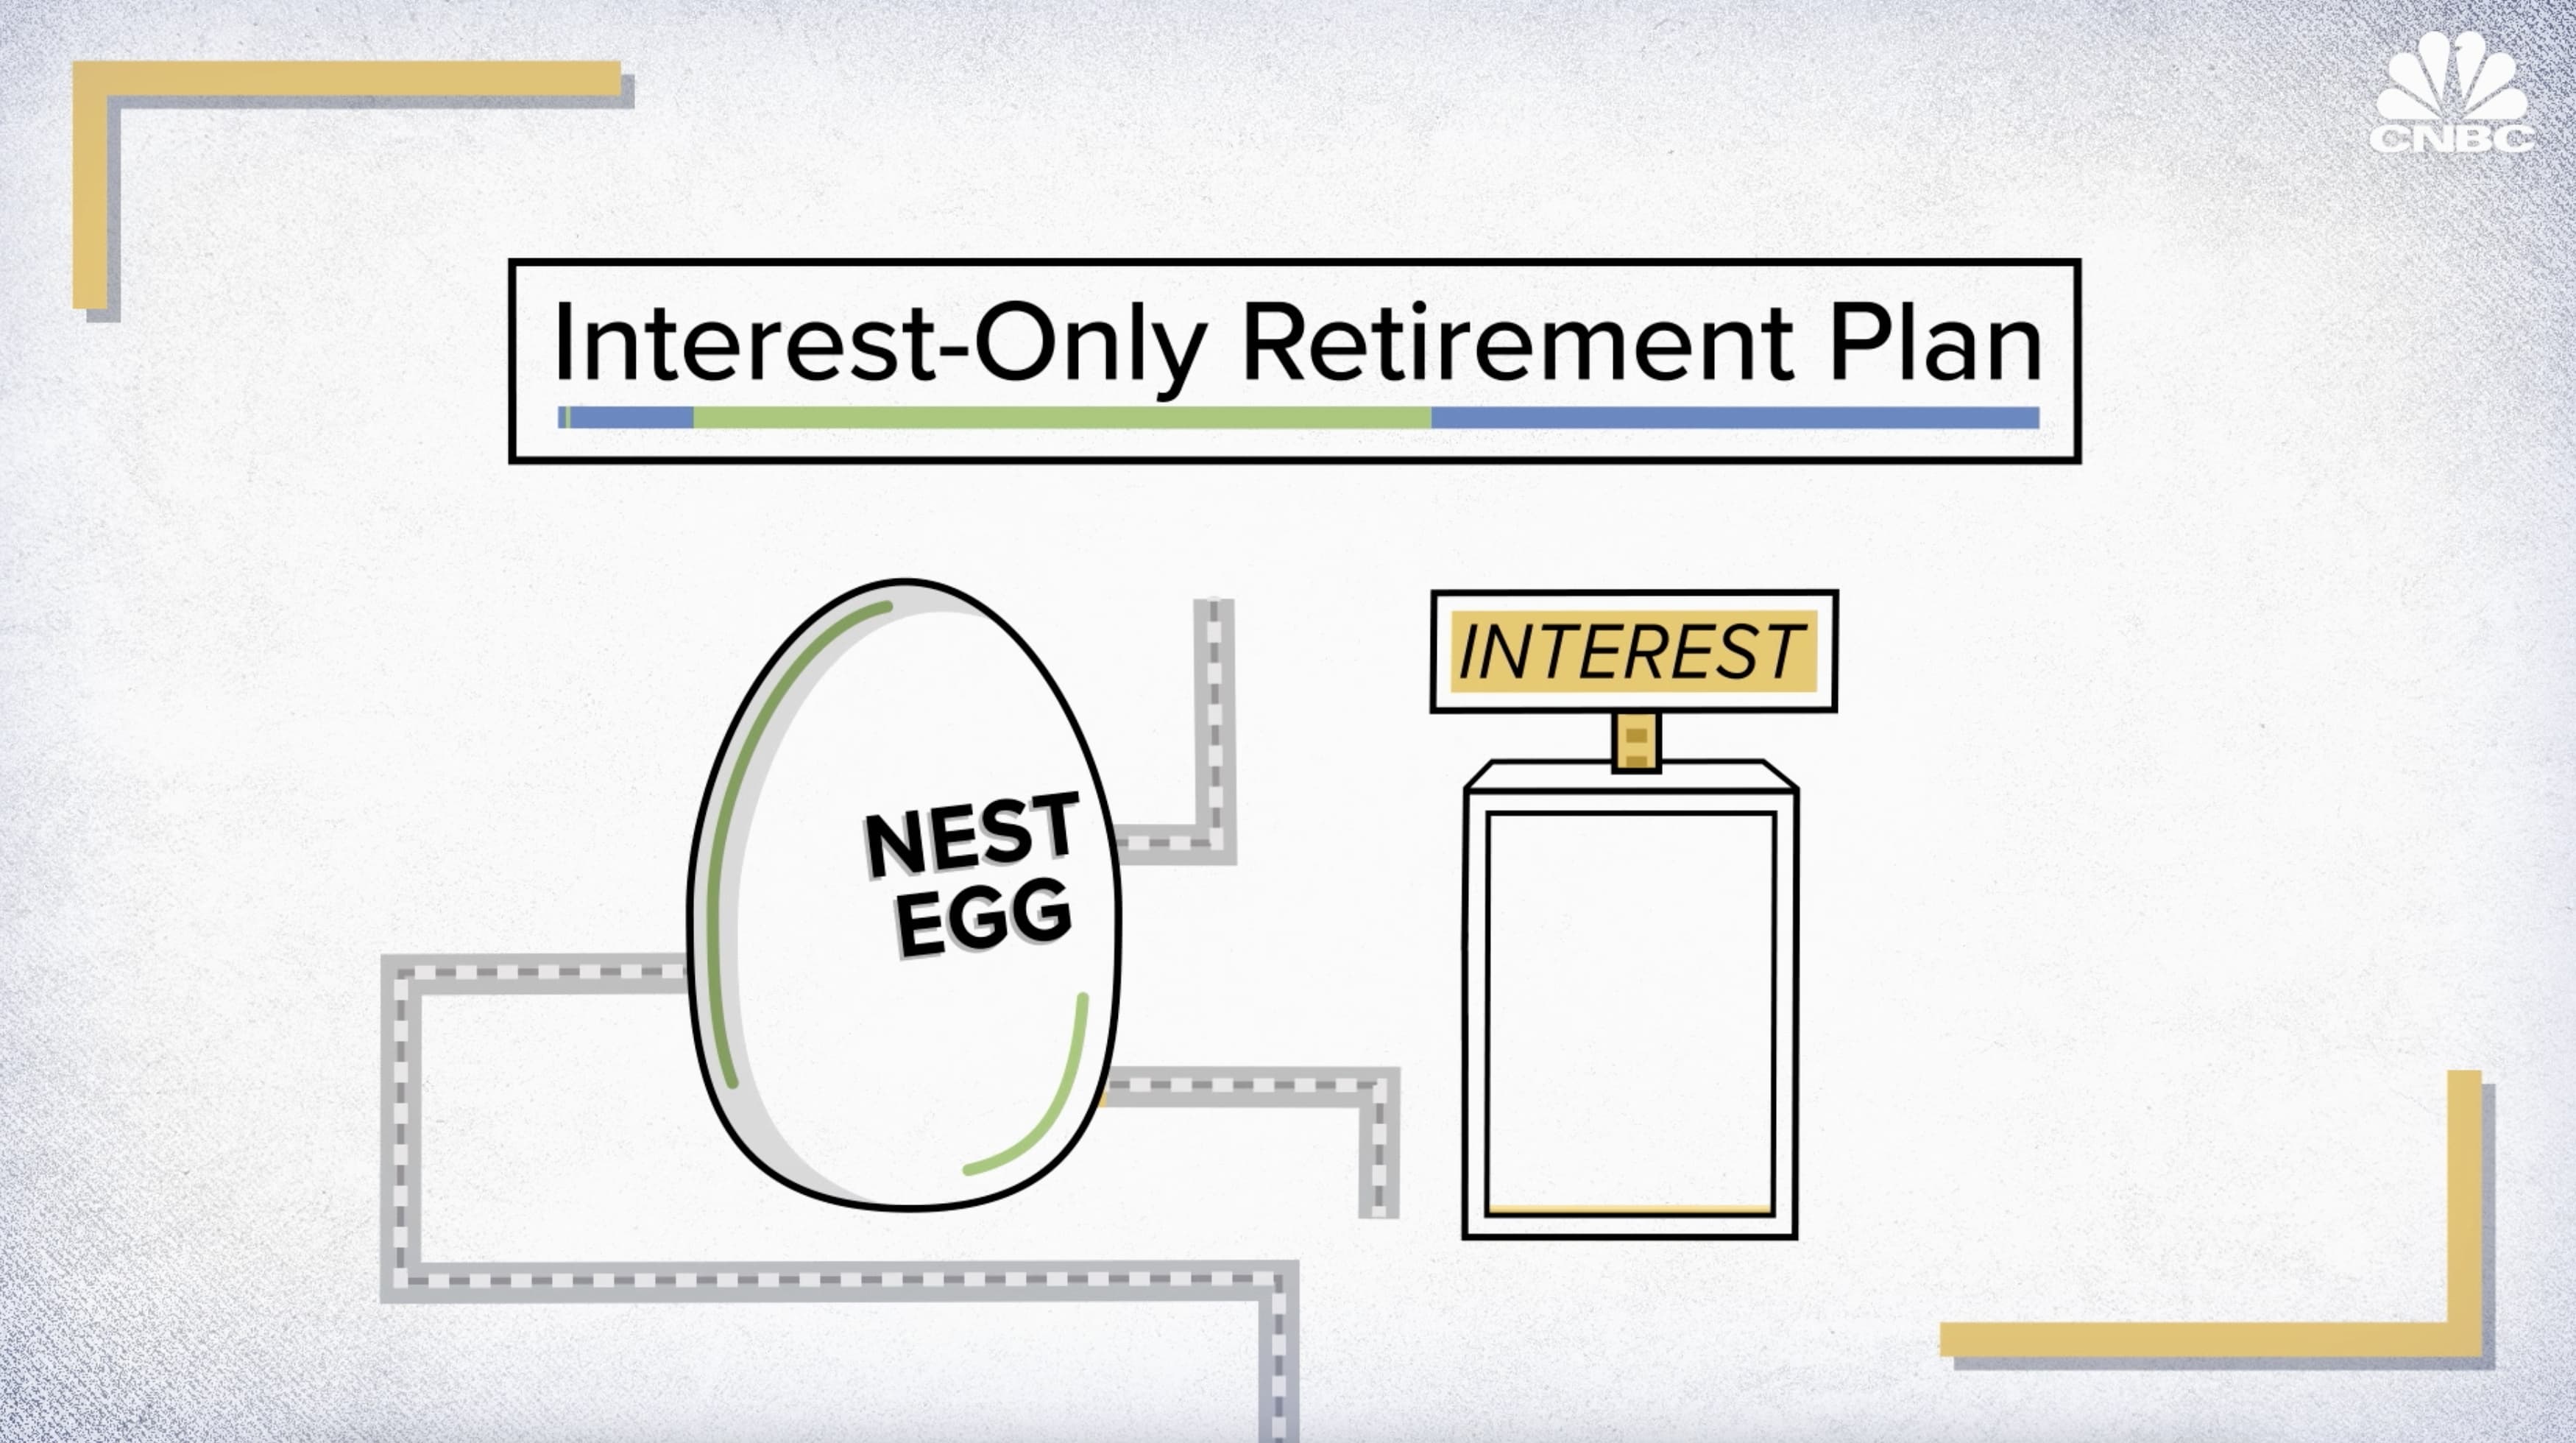 How to earn $60,000, $70,000 and $80,000 in interest alone every year in retirement